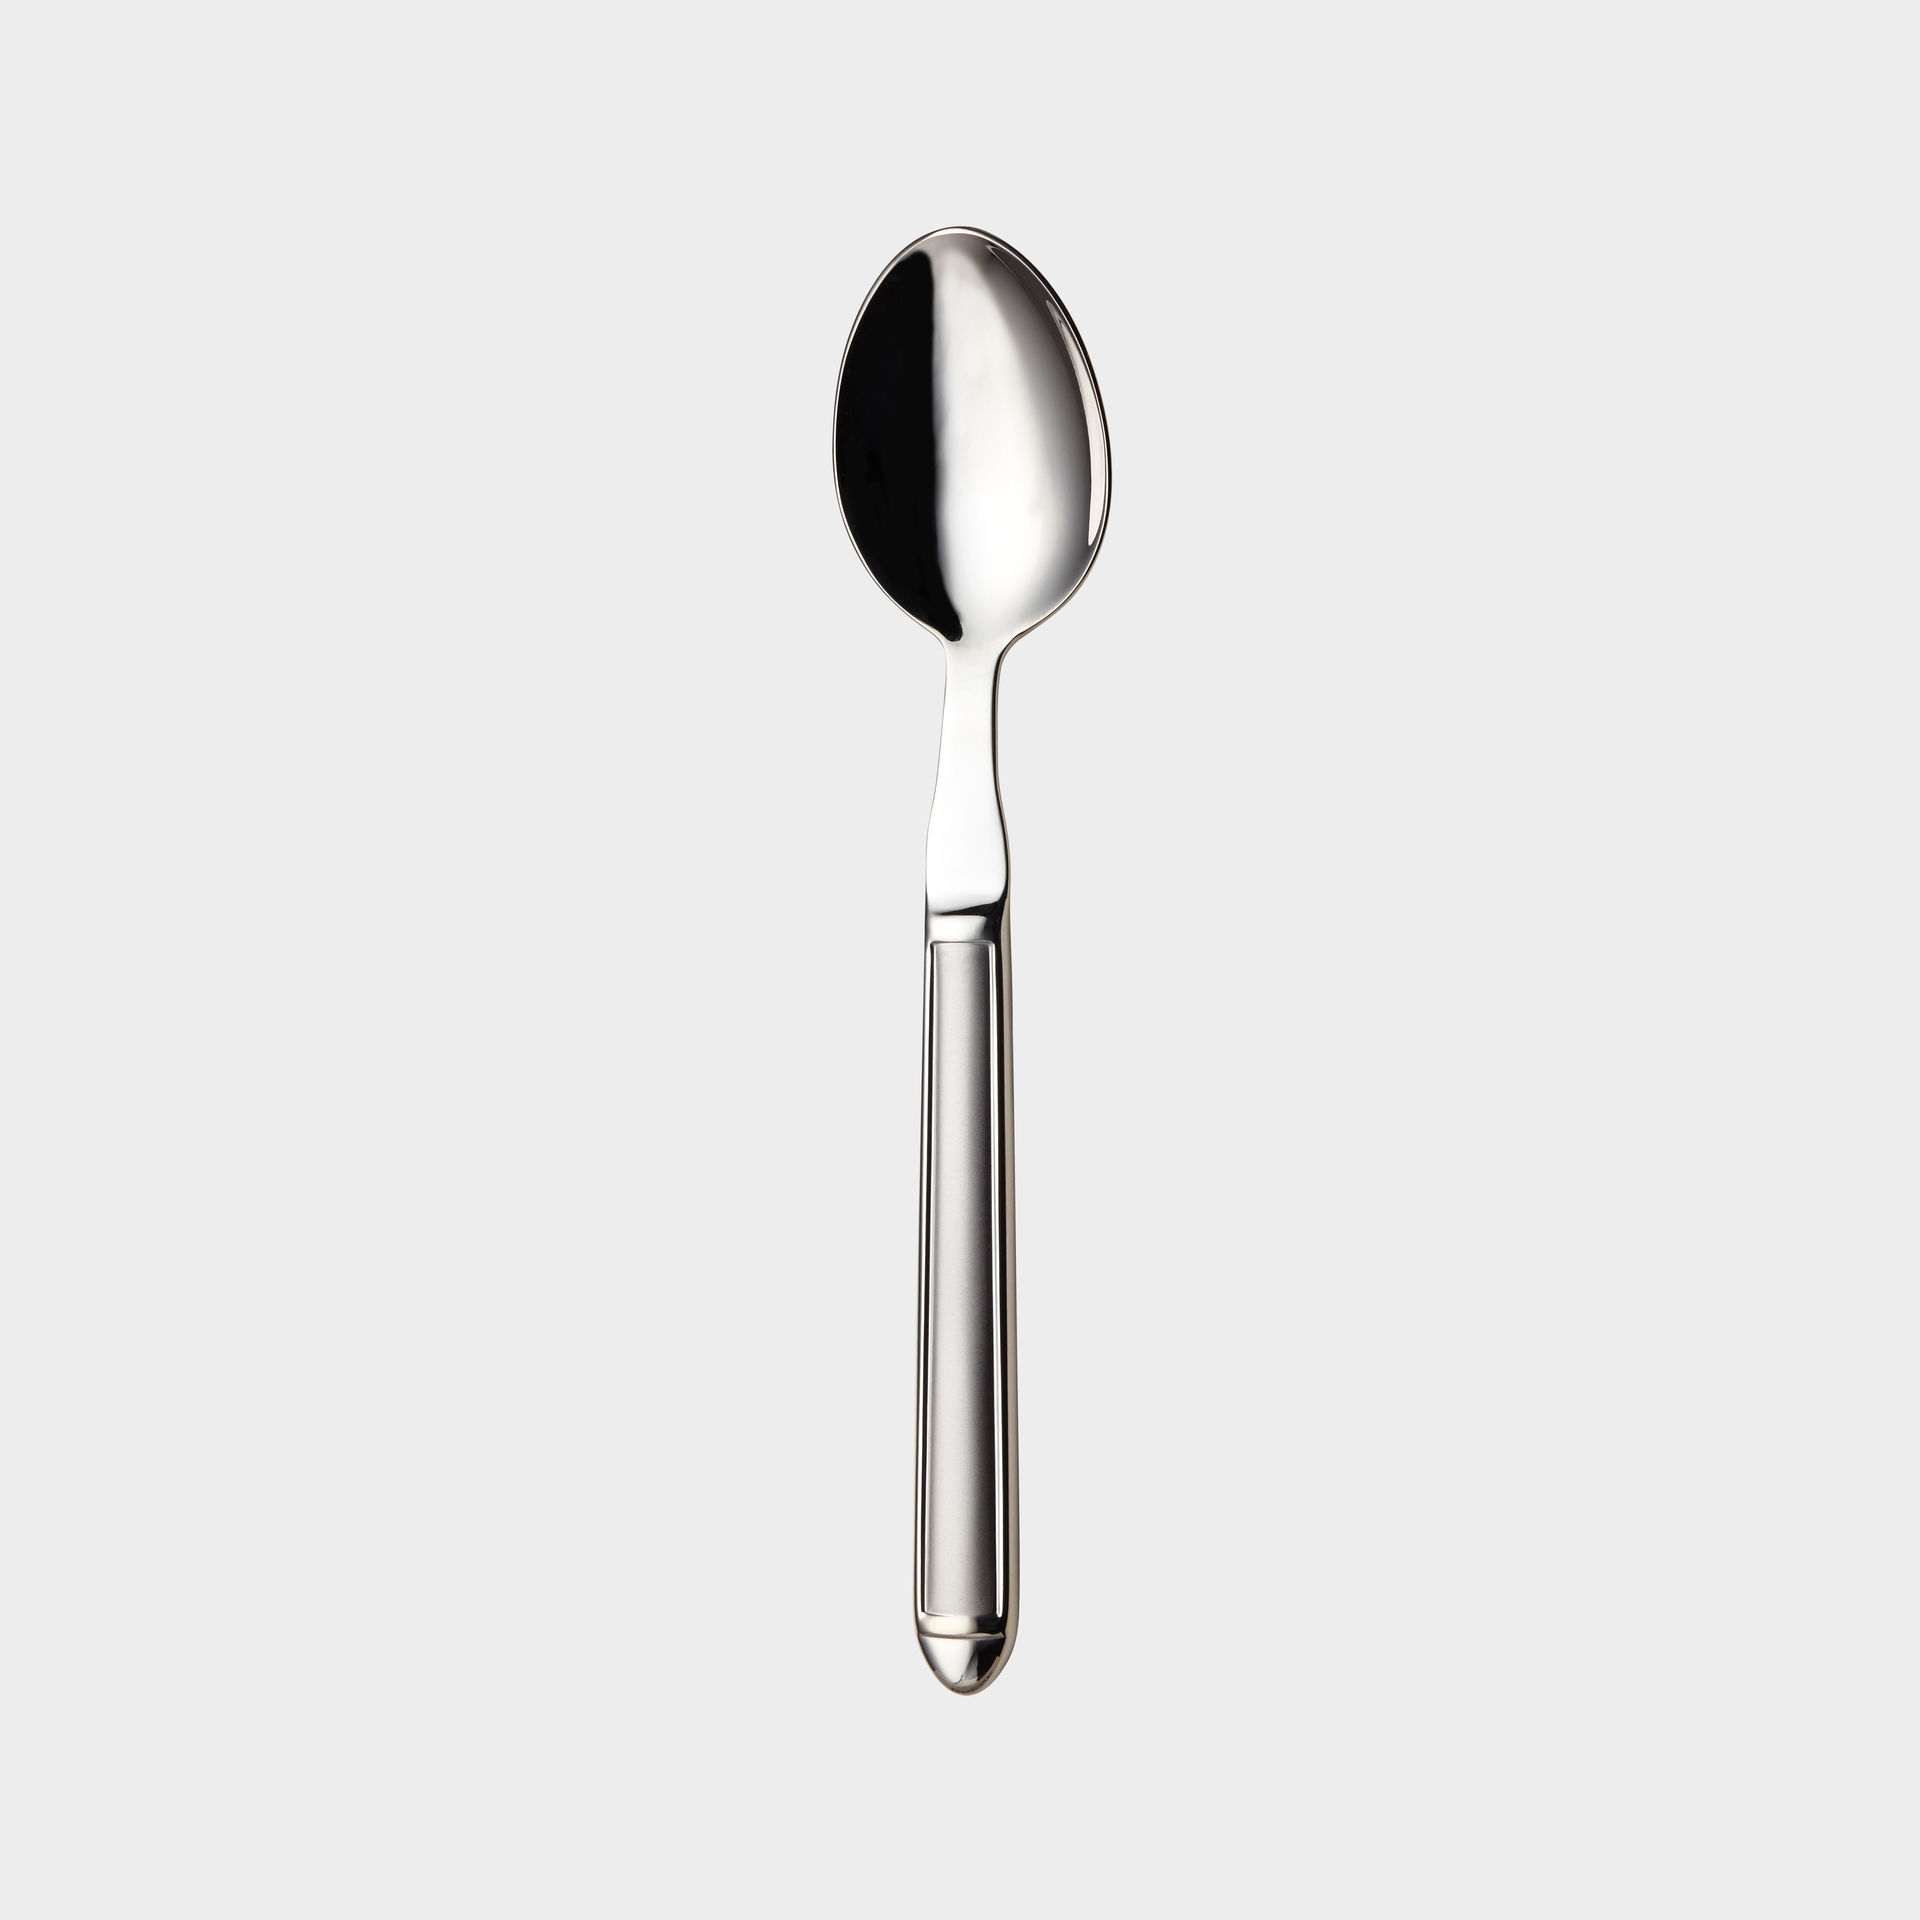 Nora dinner spoon product image